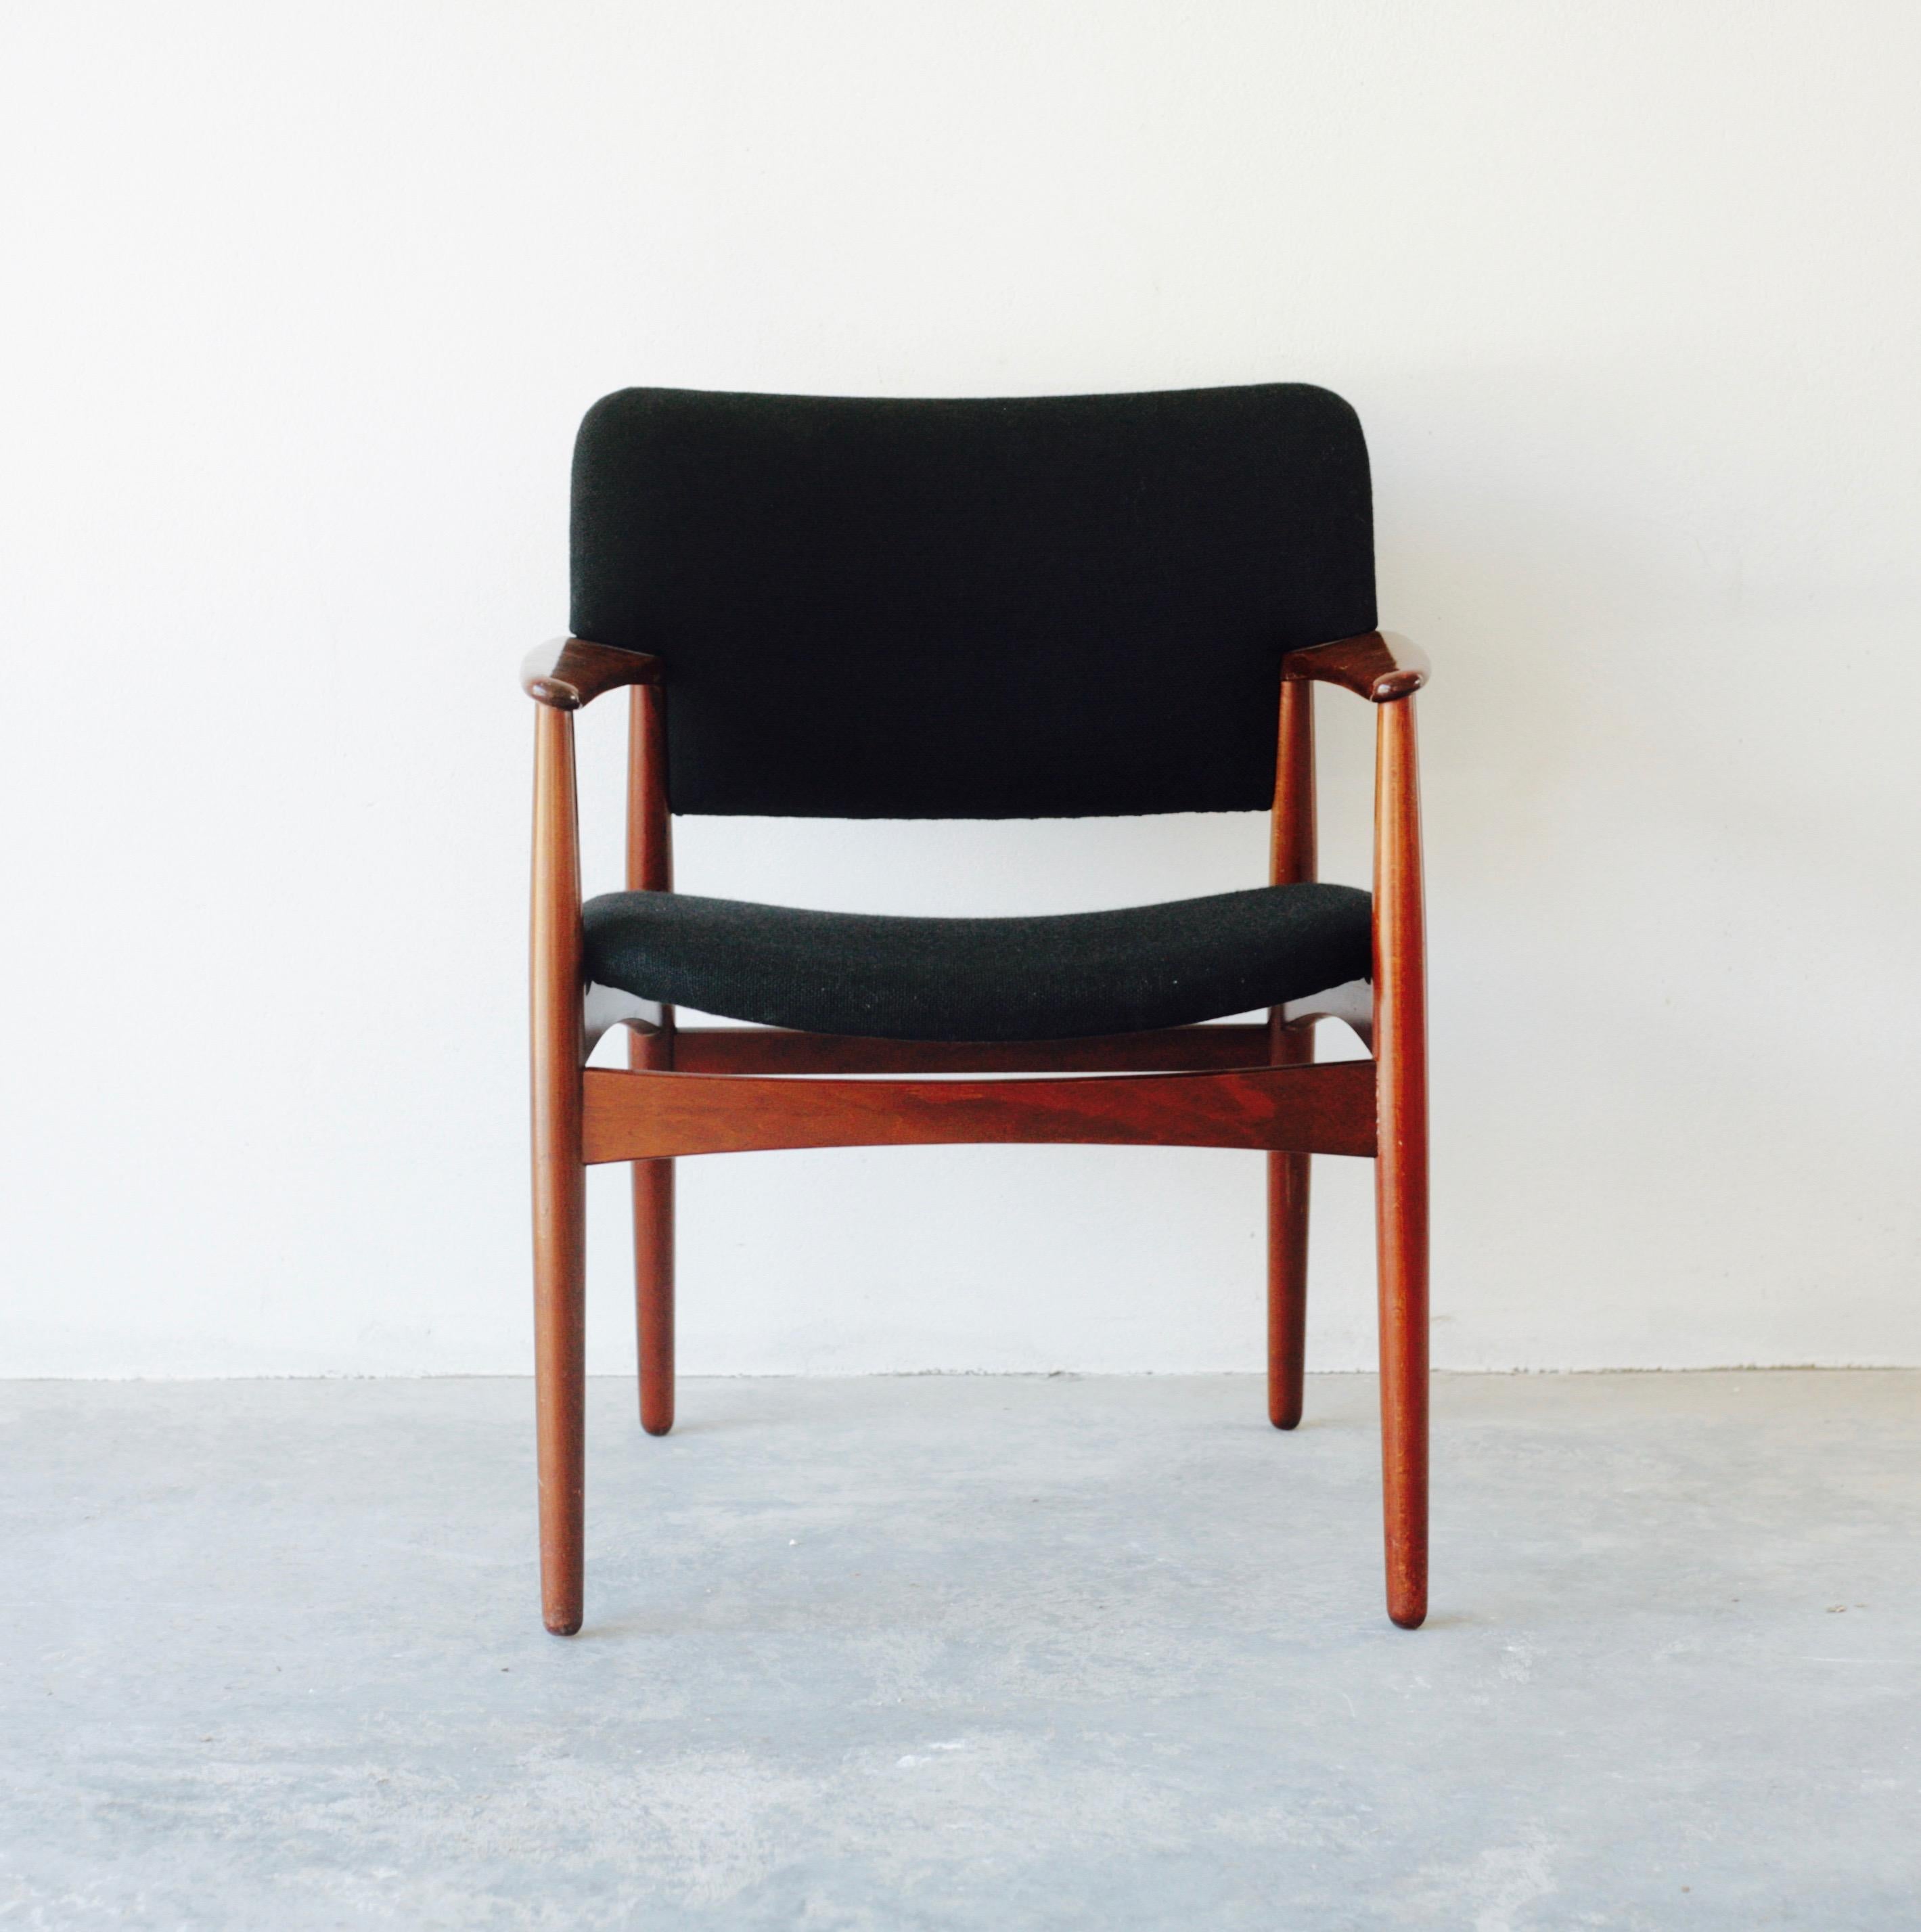 Four model 4205 dining room armchairs designed by Ejner Larsen and Aksel Bender Madsen for Fritz Hansen in the 1950s. Seats covered with black wool upholstery. Chair made of stained beech.